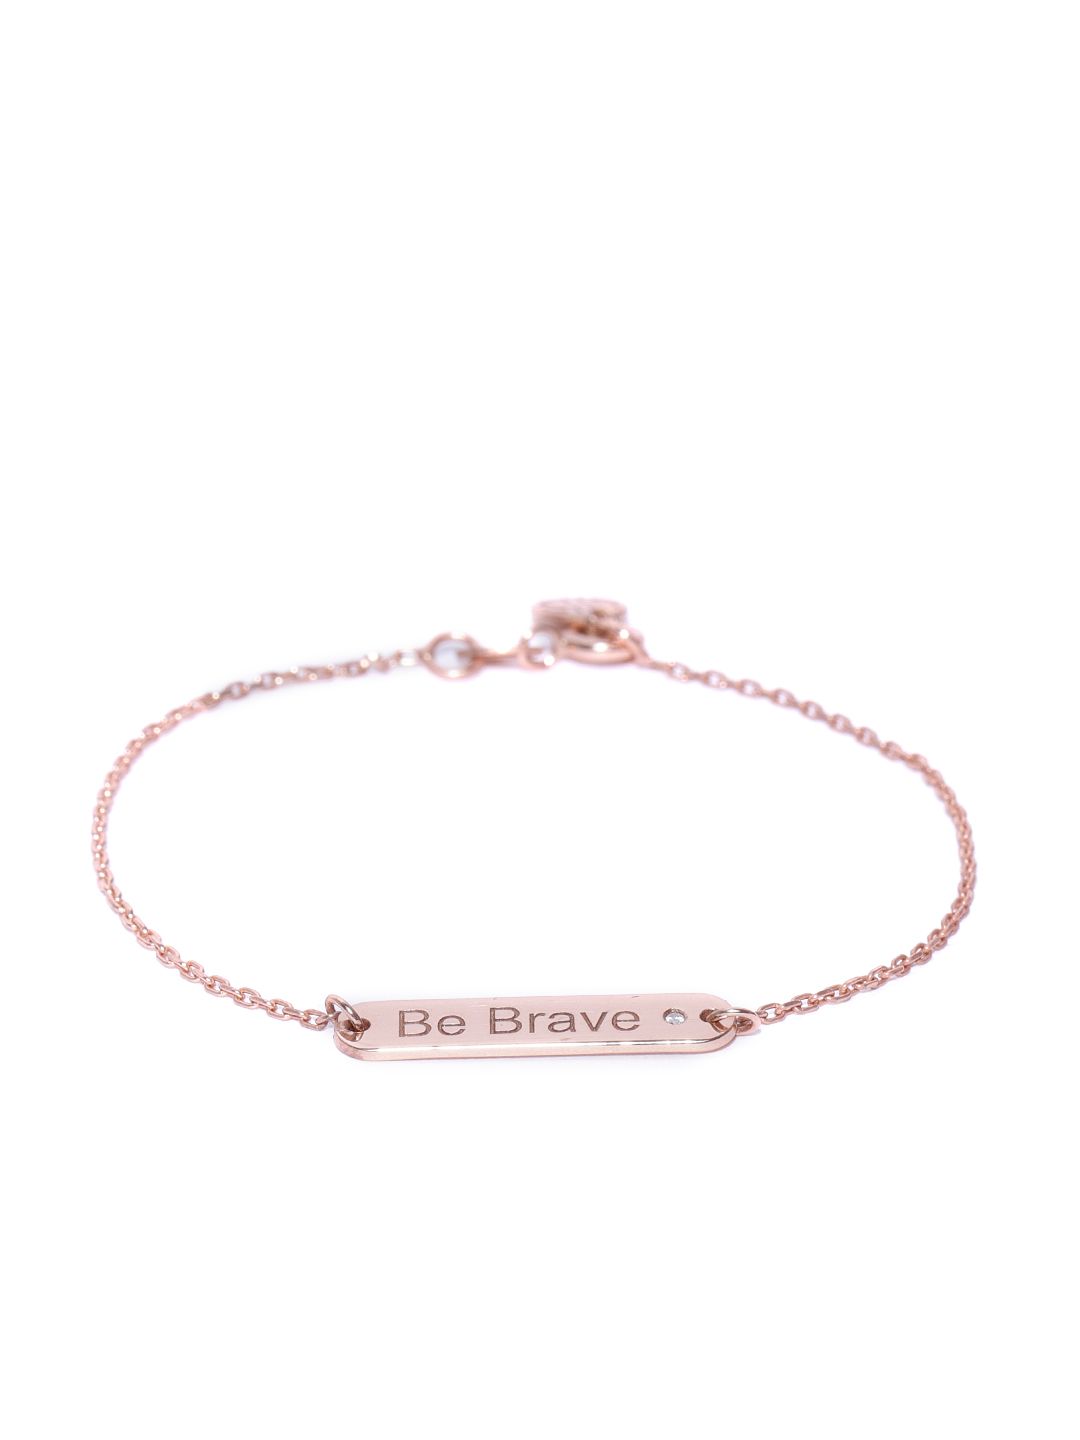 Carlton London 925 Sterling Silver Rose Gold-Plated CZ-Studded Textured Charm Bracelet Price in India